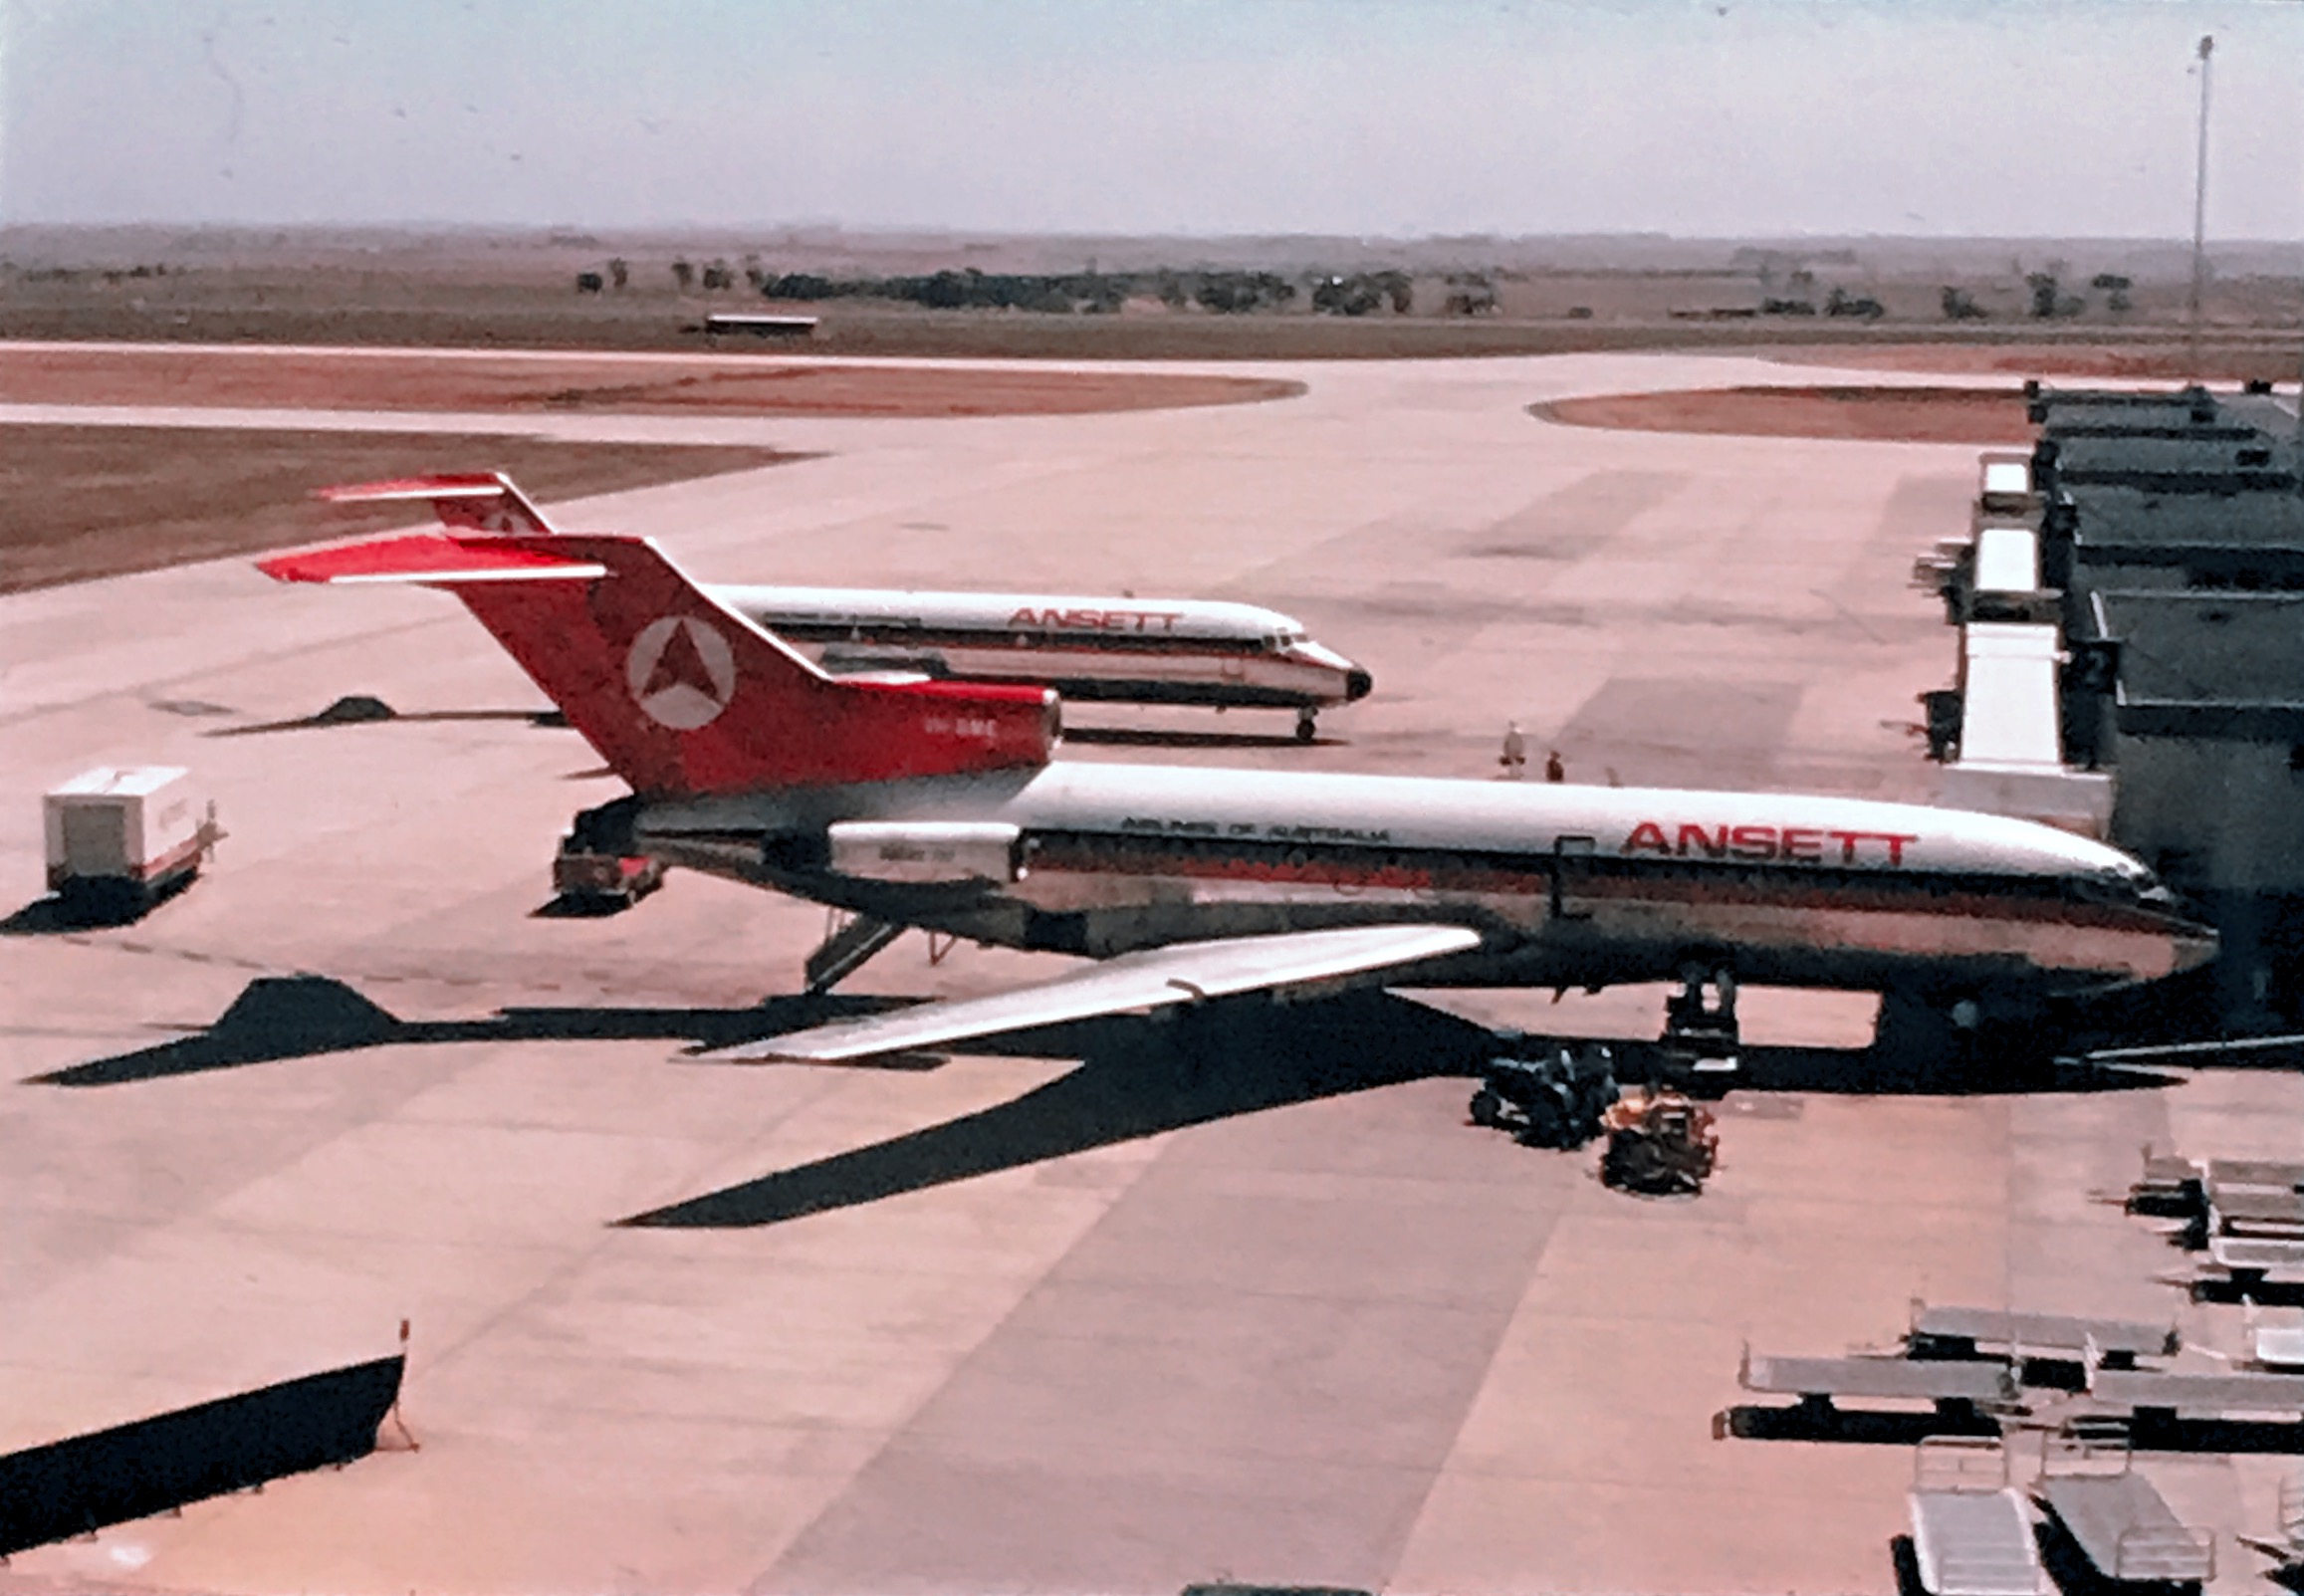 Melbourne Airport in the 1970s. Showing an Ansett Airlines Boeing 727 and a DC9